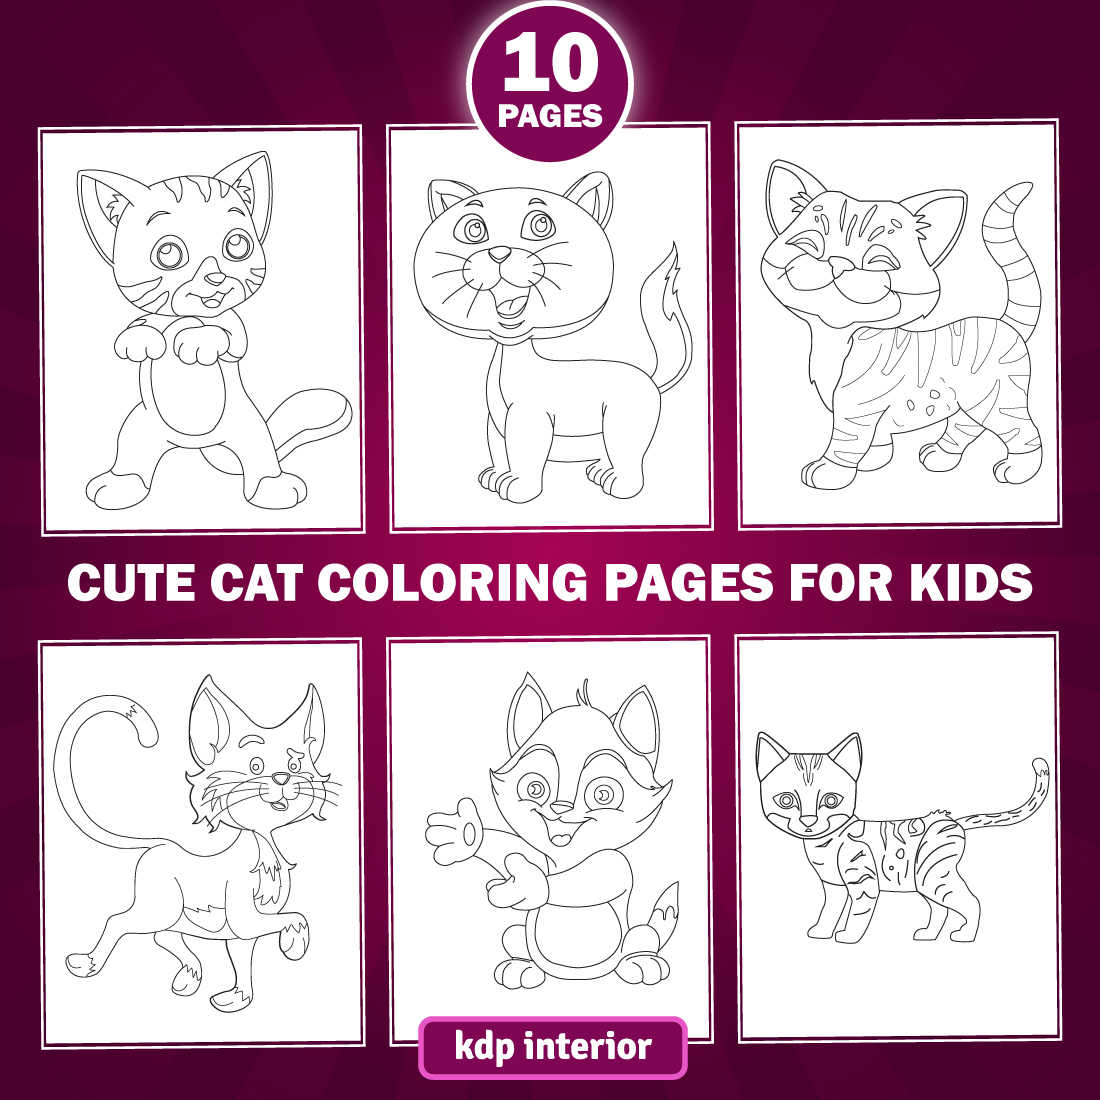 10 Cute Cat Coloring Pages for KDP Interior for Kids and Adult main cover.